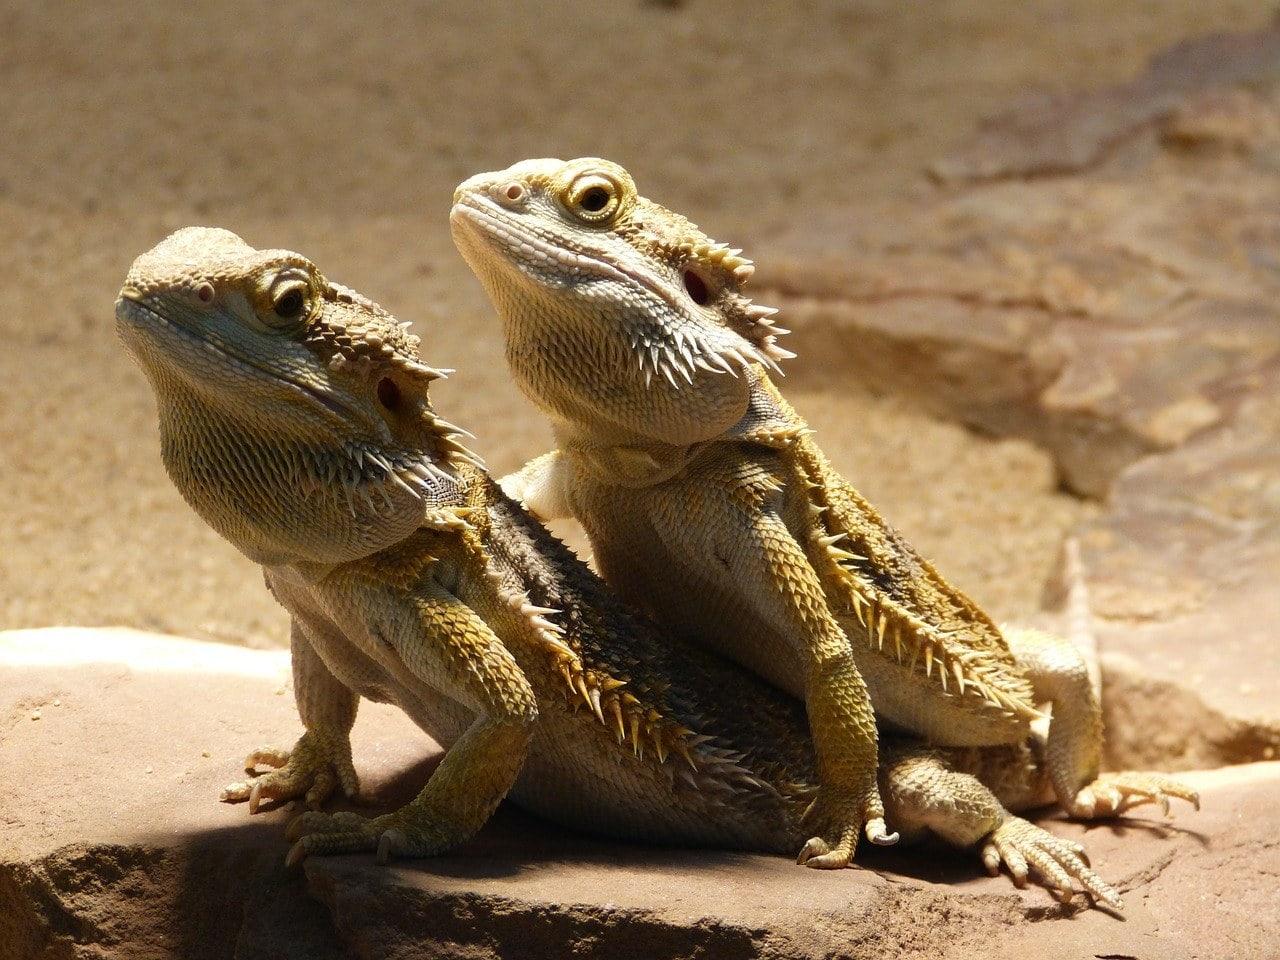 two bearded dragons